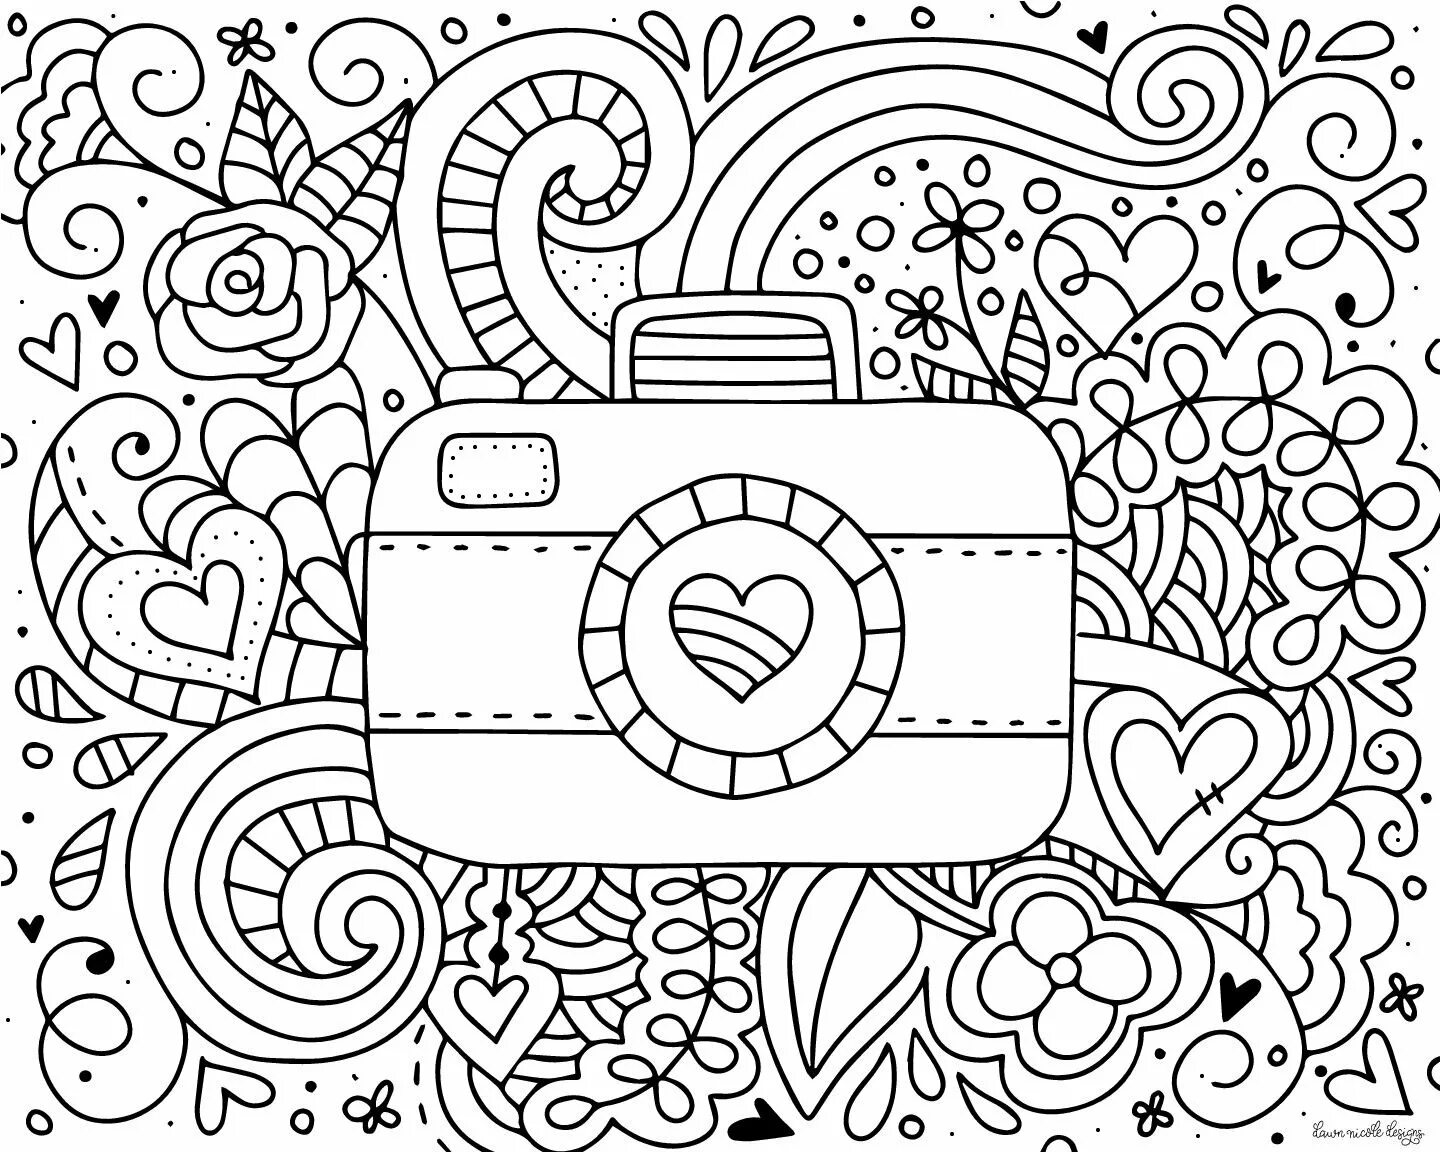 Intriguing anti-stress coloring book for markers